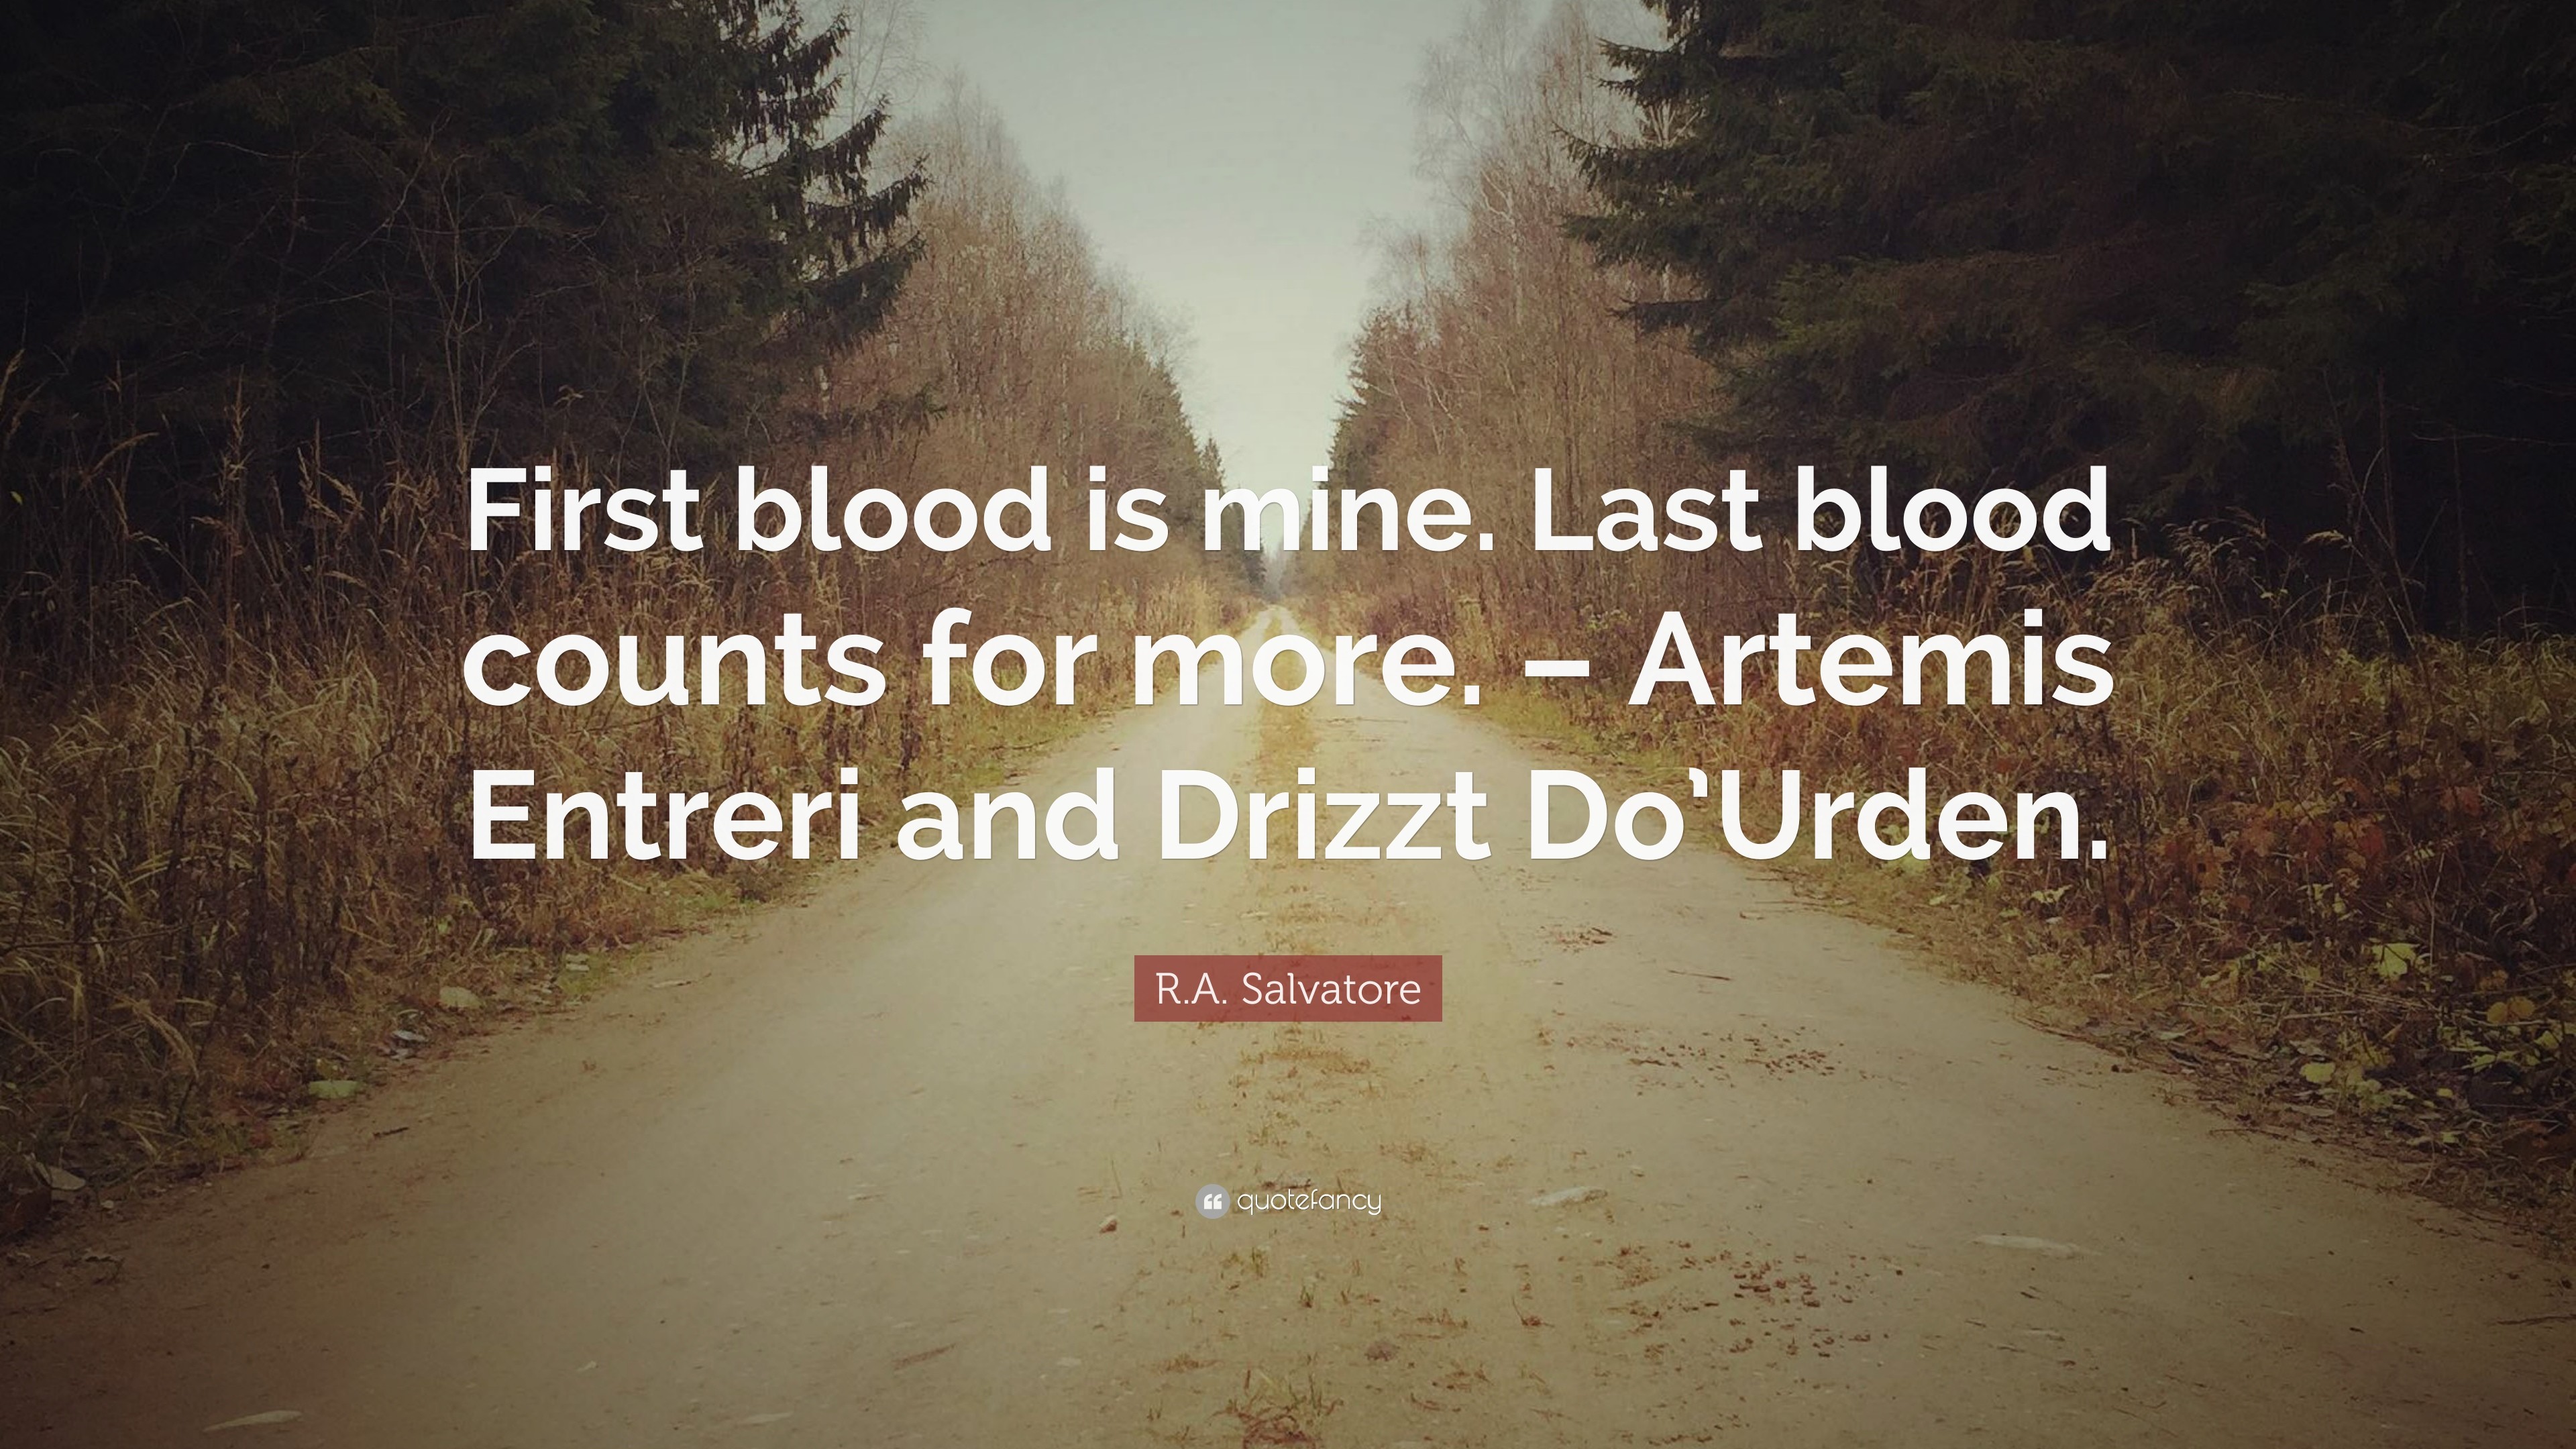 R.A. Salvatore Quote First blood is mine. Last blood counts for more